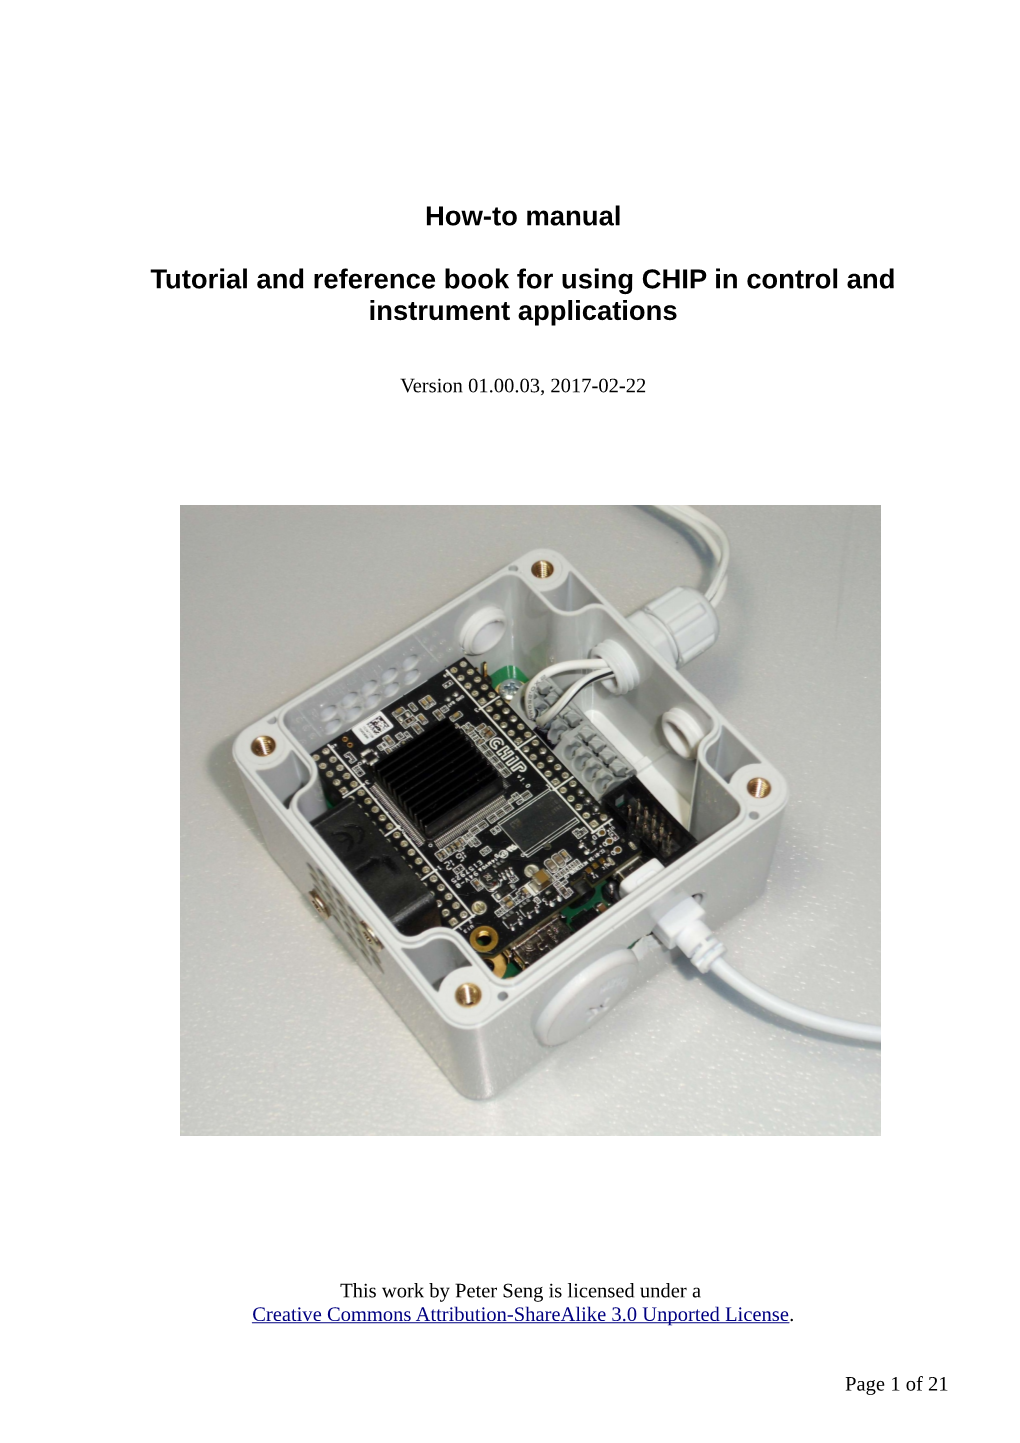 How-To Manual Tutorial and Reference Book for Using CHIP in Control And